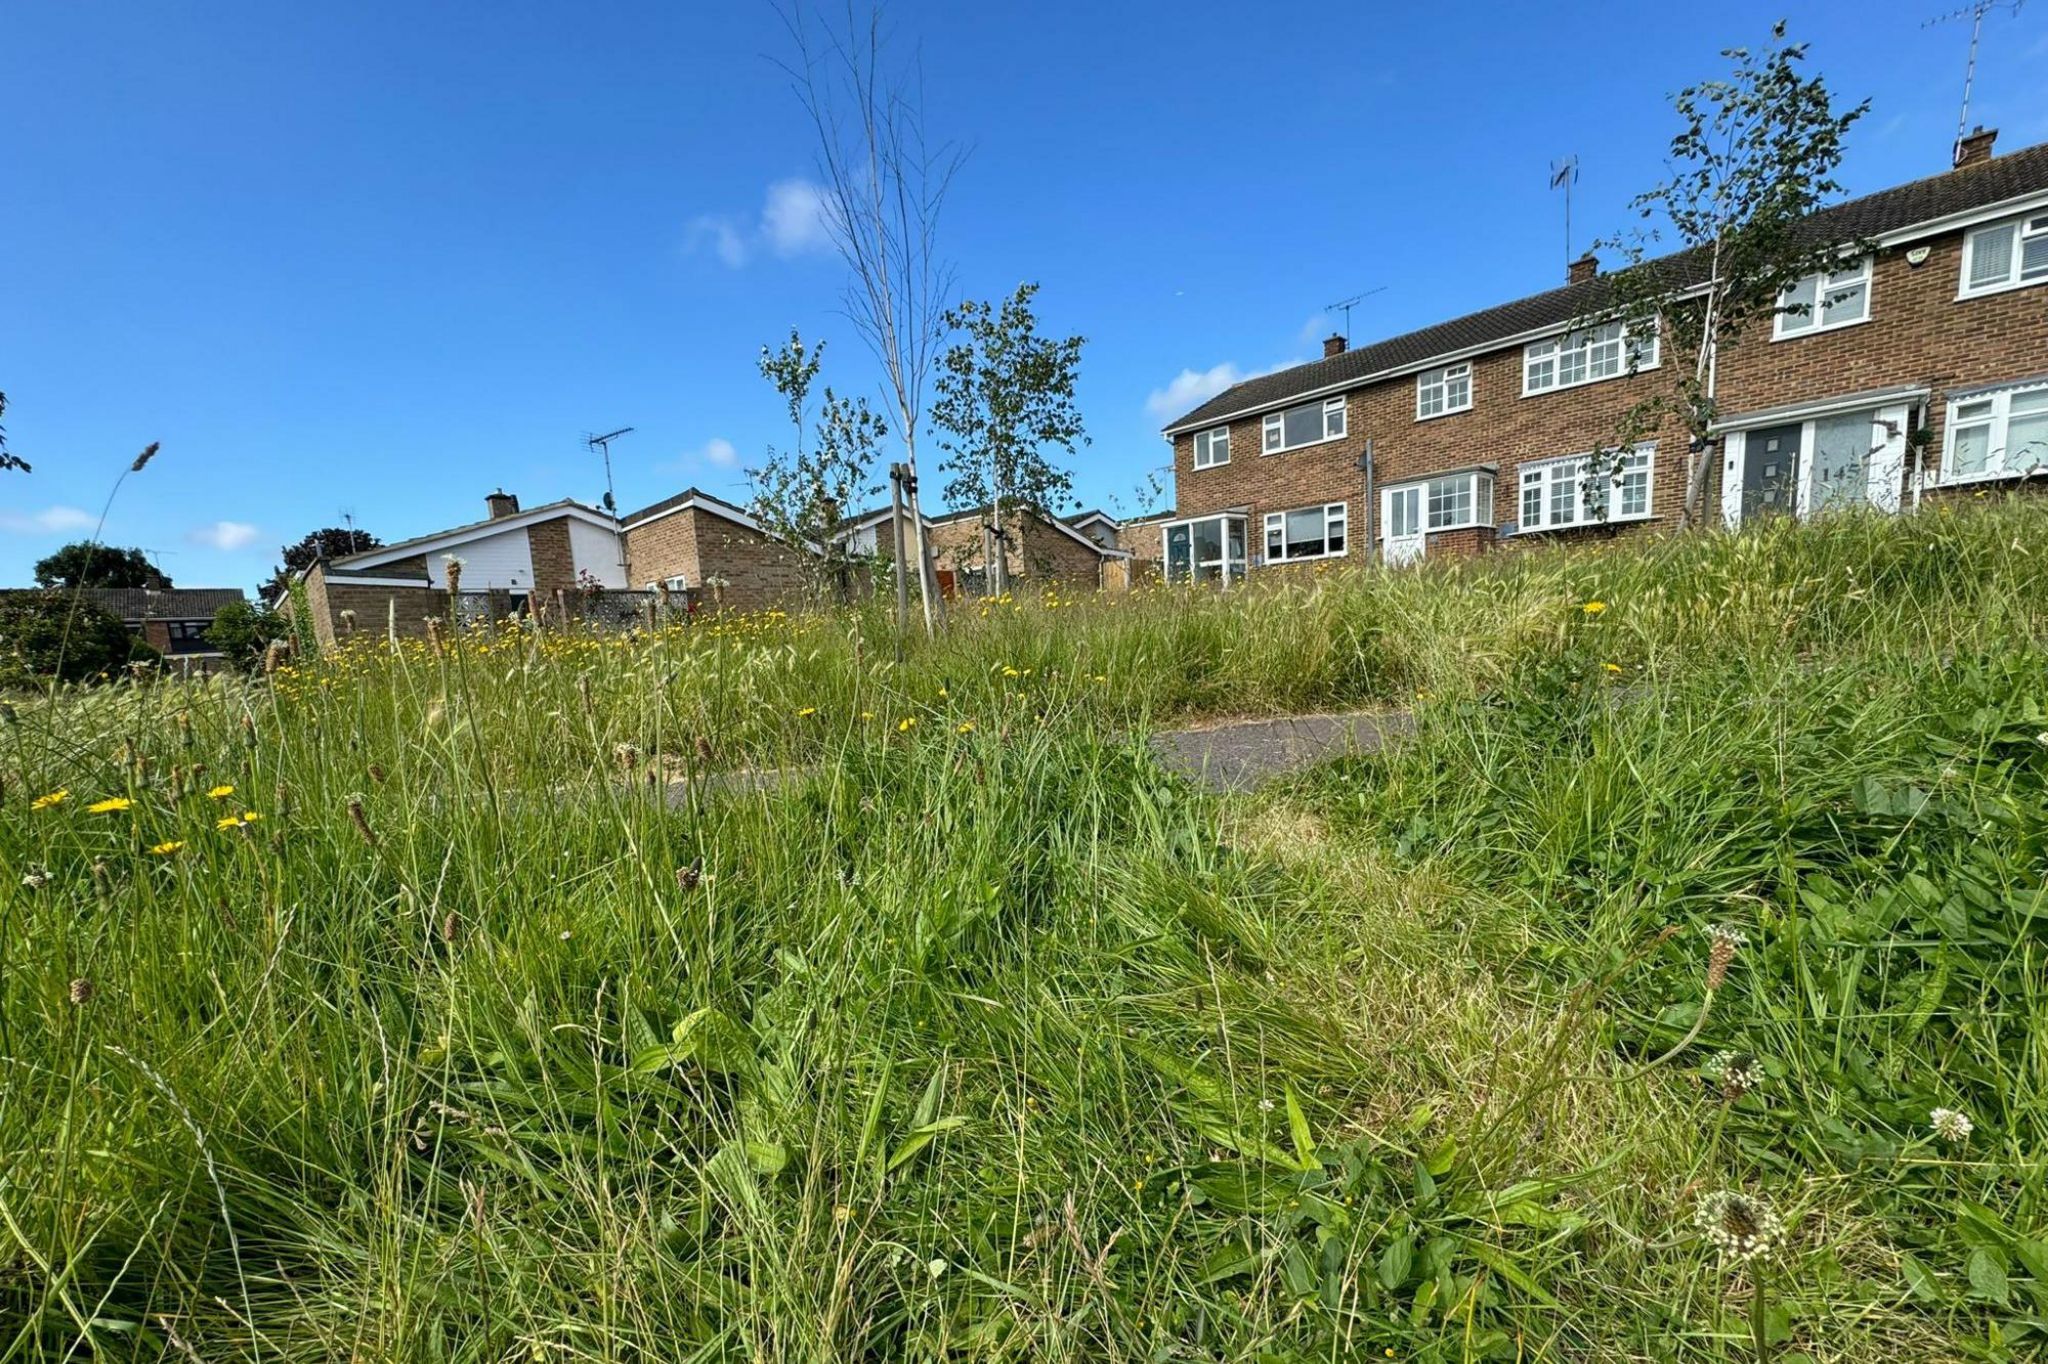 Overgrown grass outside some terraced houses